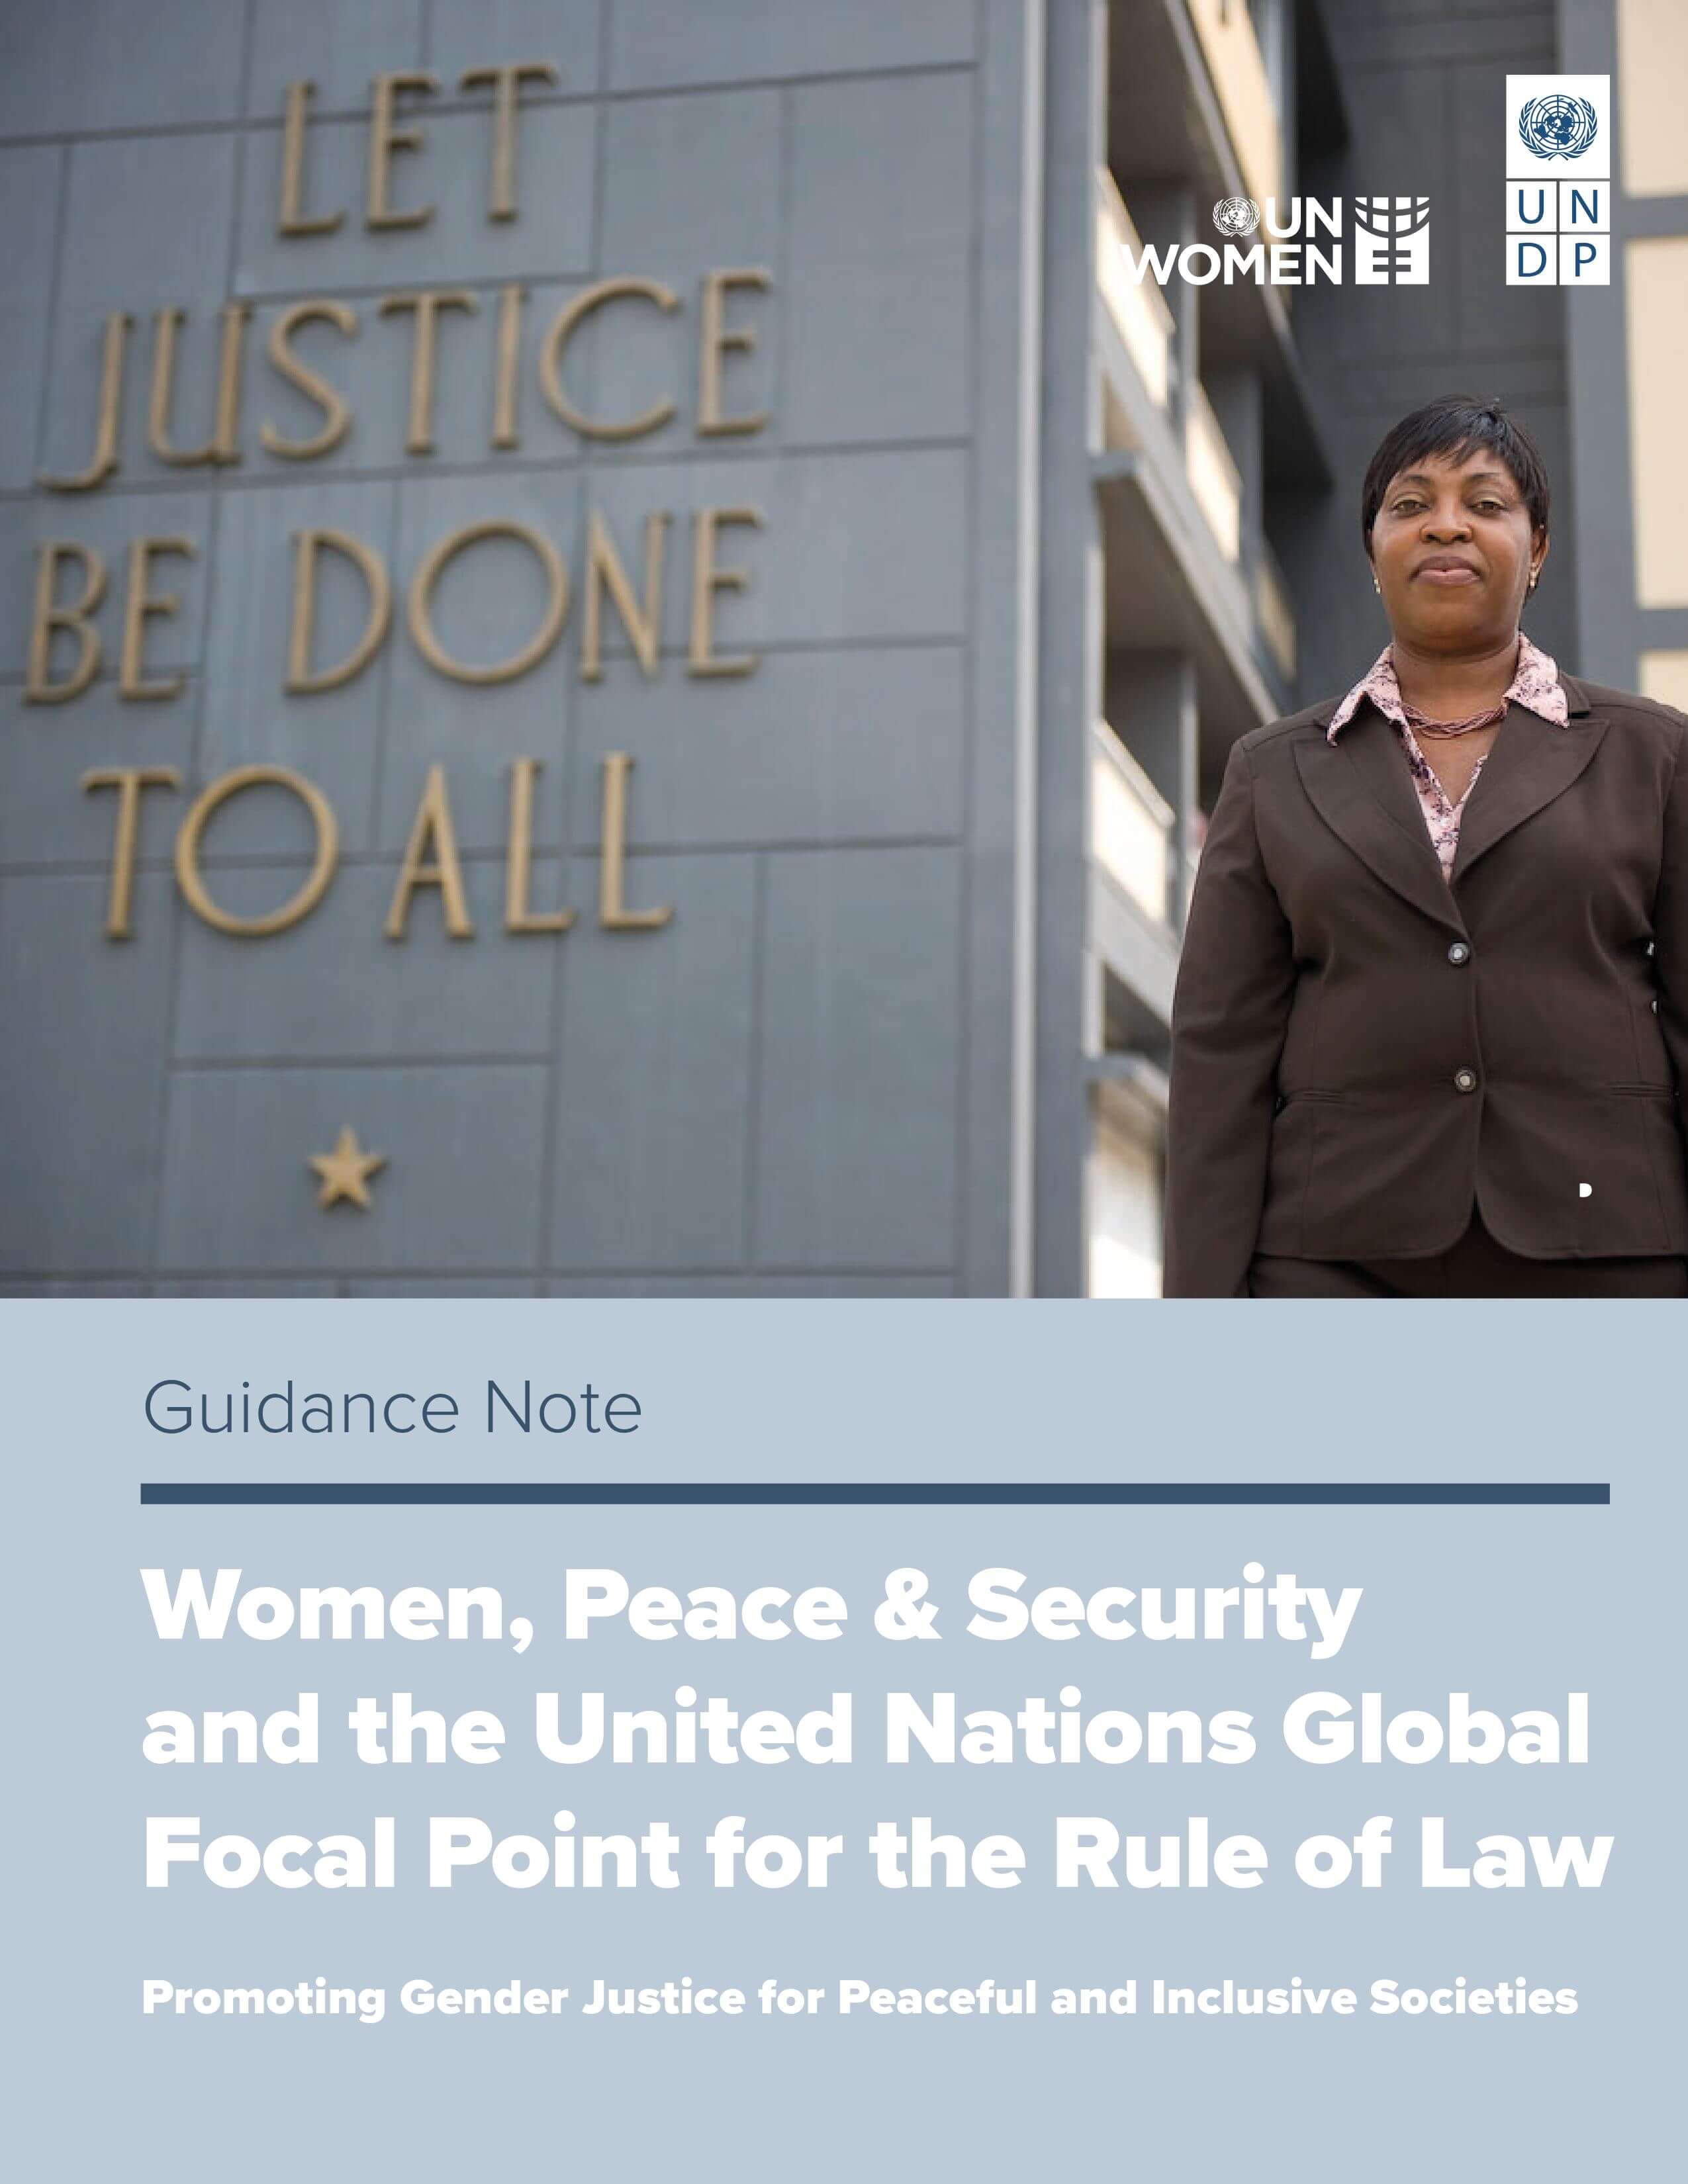 Women, peace, and security and the United Nations Global Focal Point for the Rule of Law